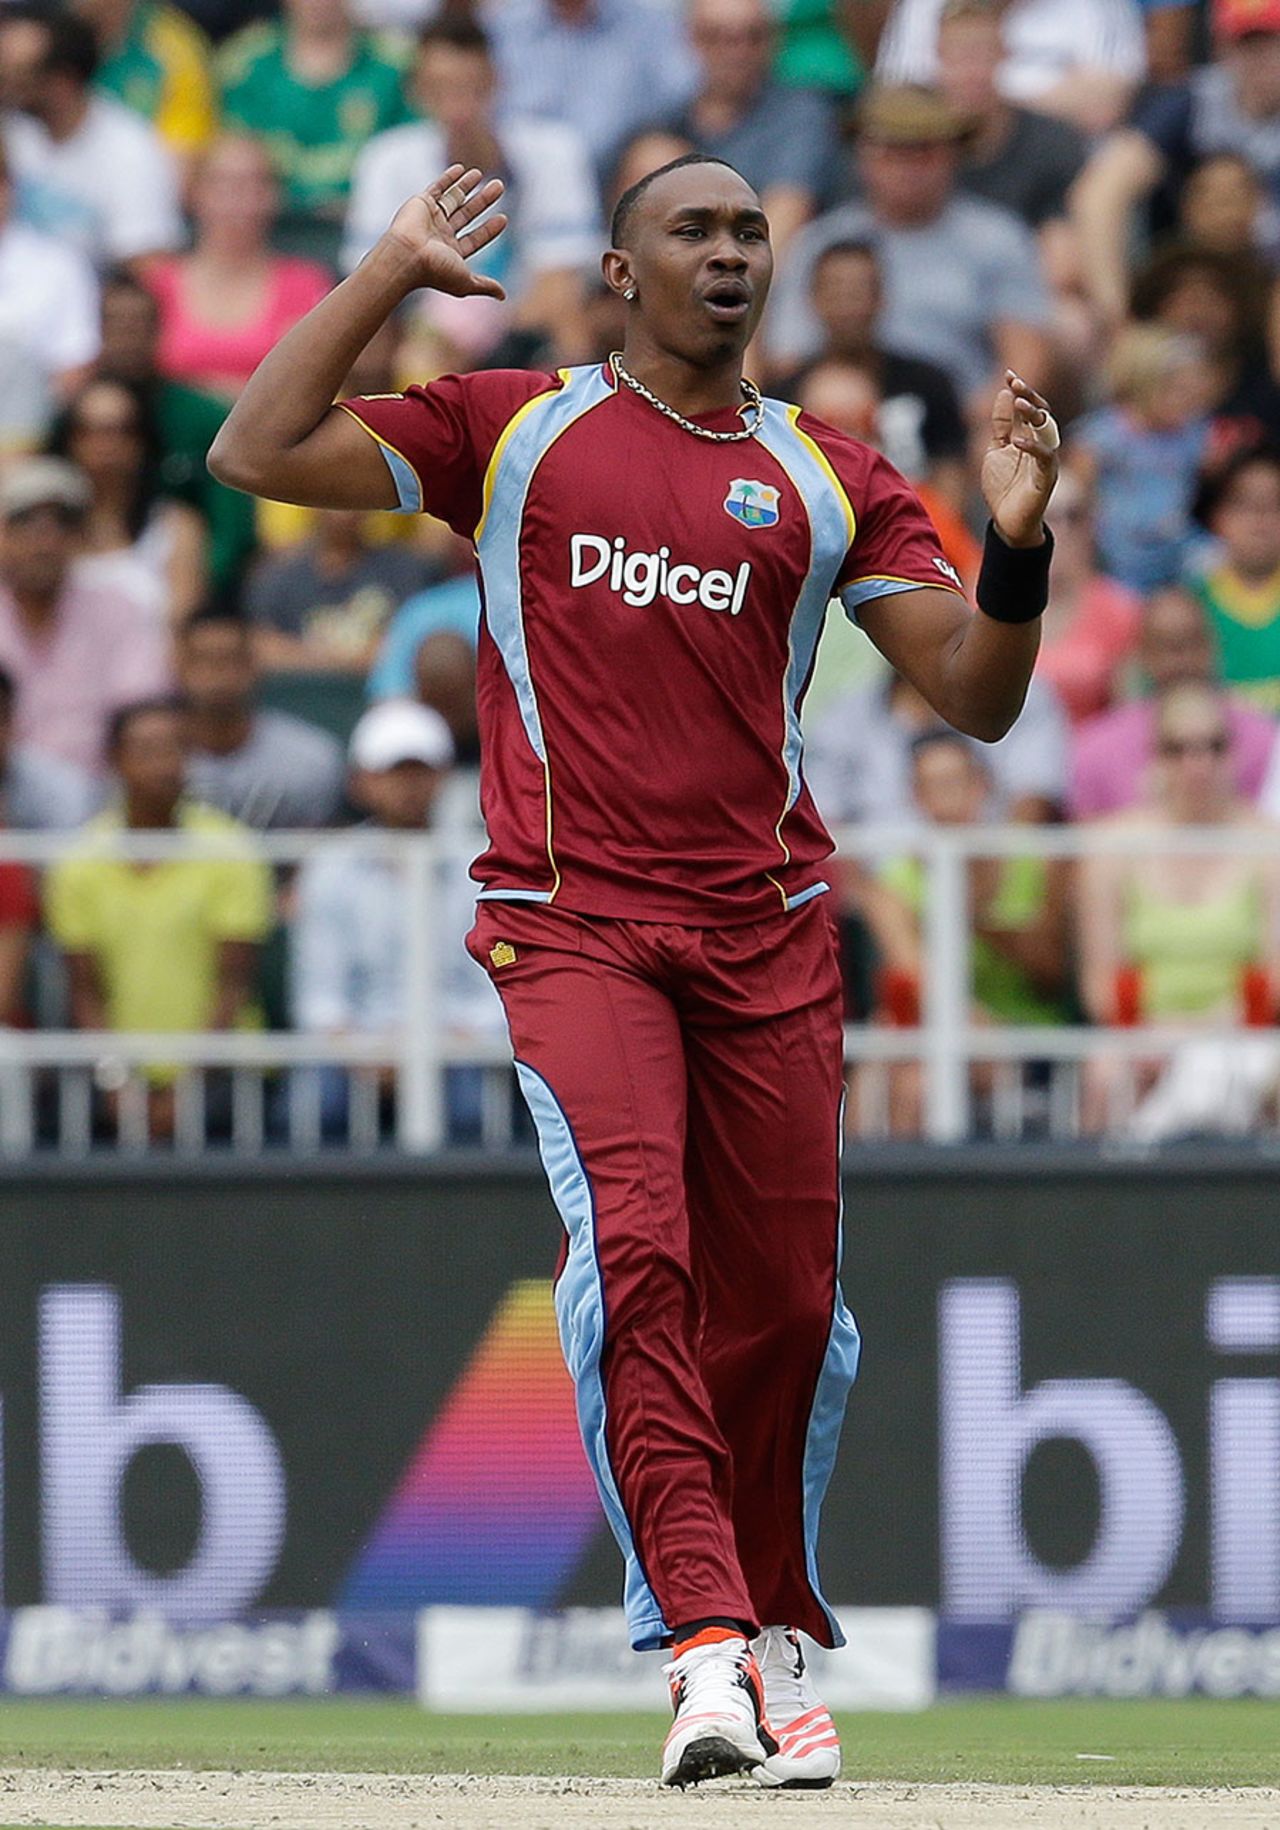 It was a difficult day for the West Indies bowlers, South Africa v West Indies, 2nd T20, Johannesburg, January 11, 2015